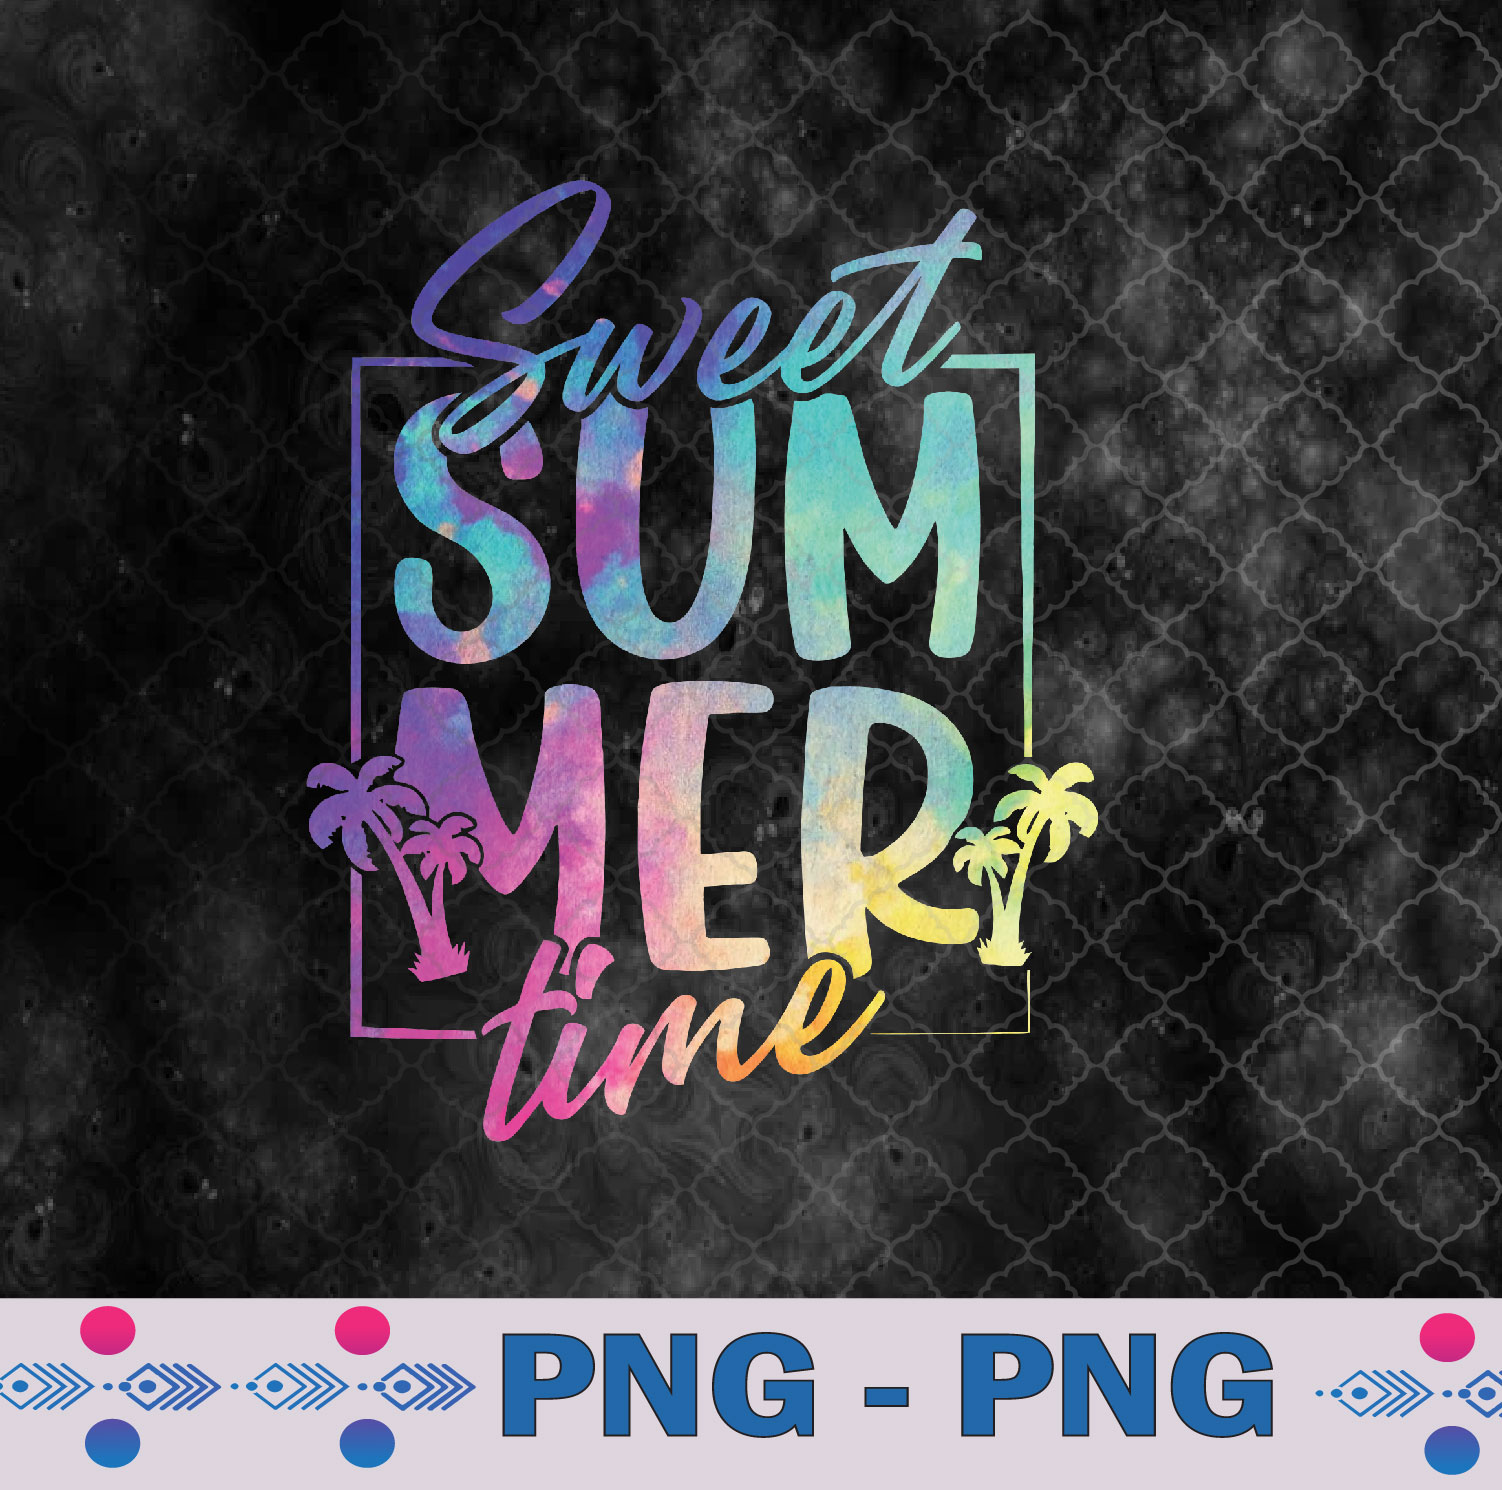 Sweet Summer Time Summer Vibes Women Kids Funny Beach Vacay Png Design